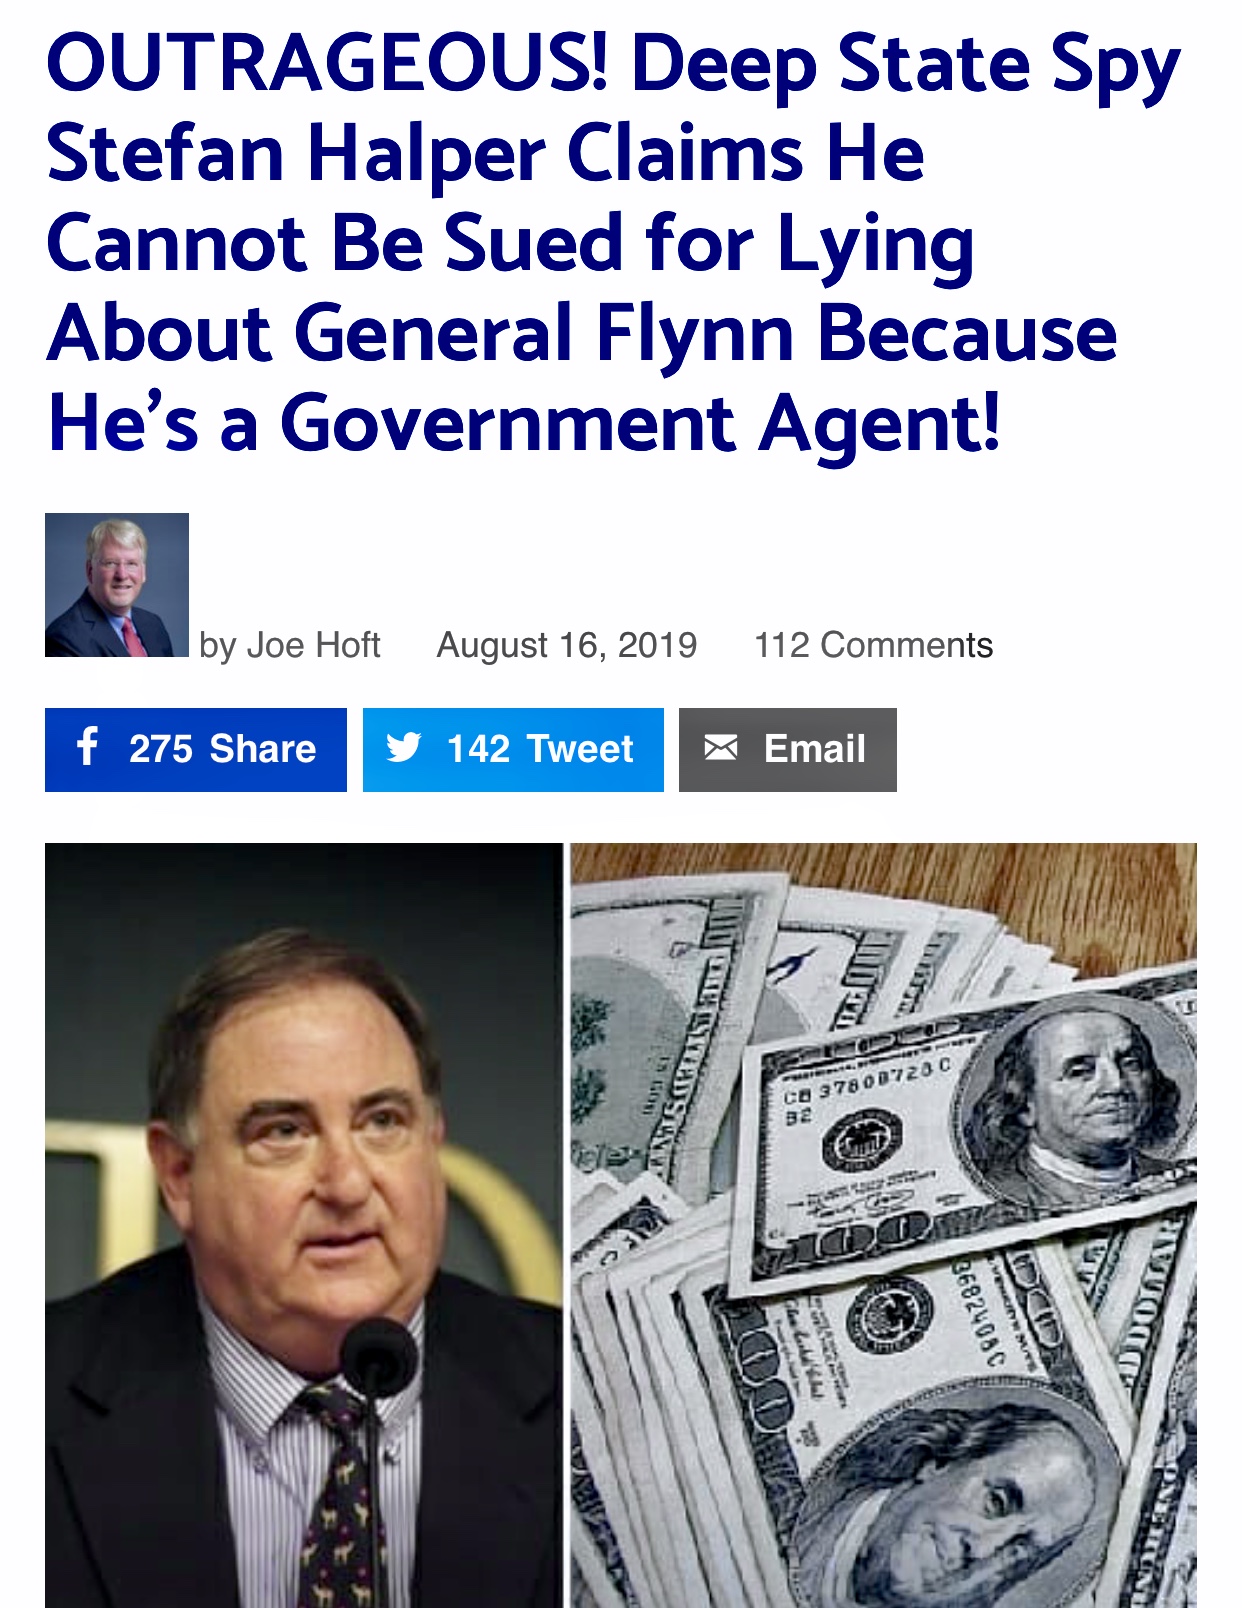 Deep State Spy Stefan Halper Claims He Cannot Be Sued for Lying About General Flynn Because He’s a Government Agent!